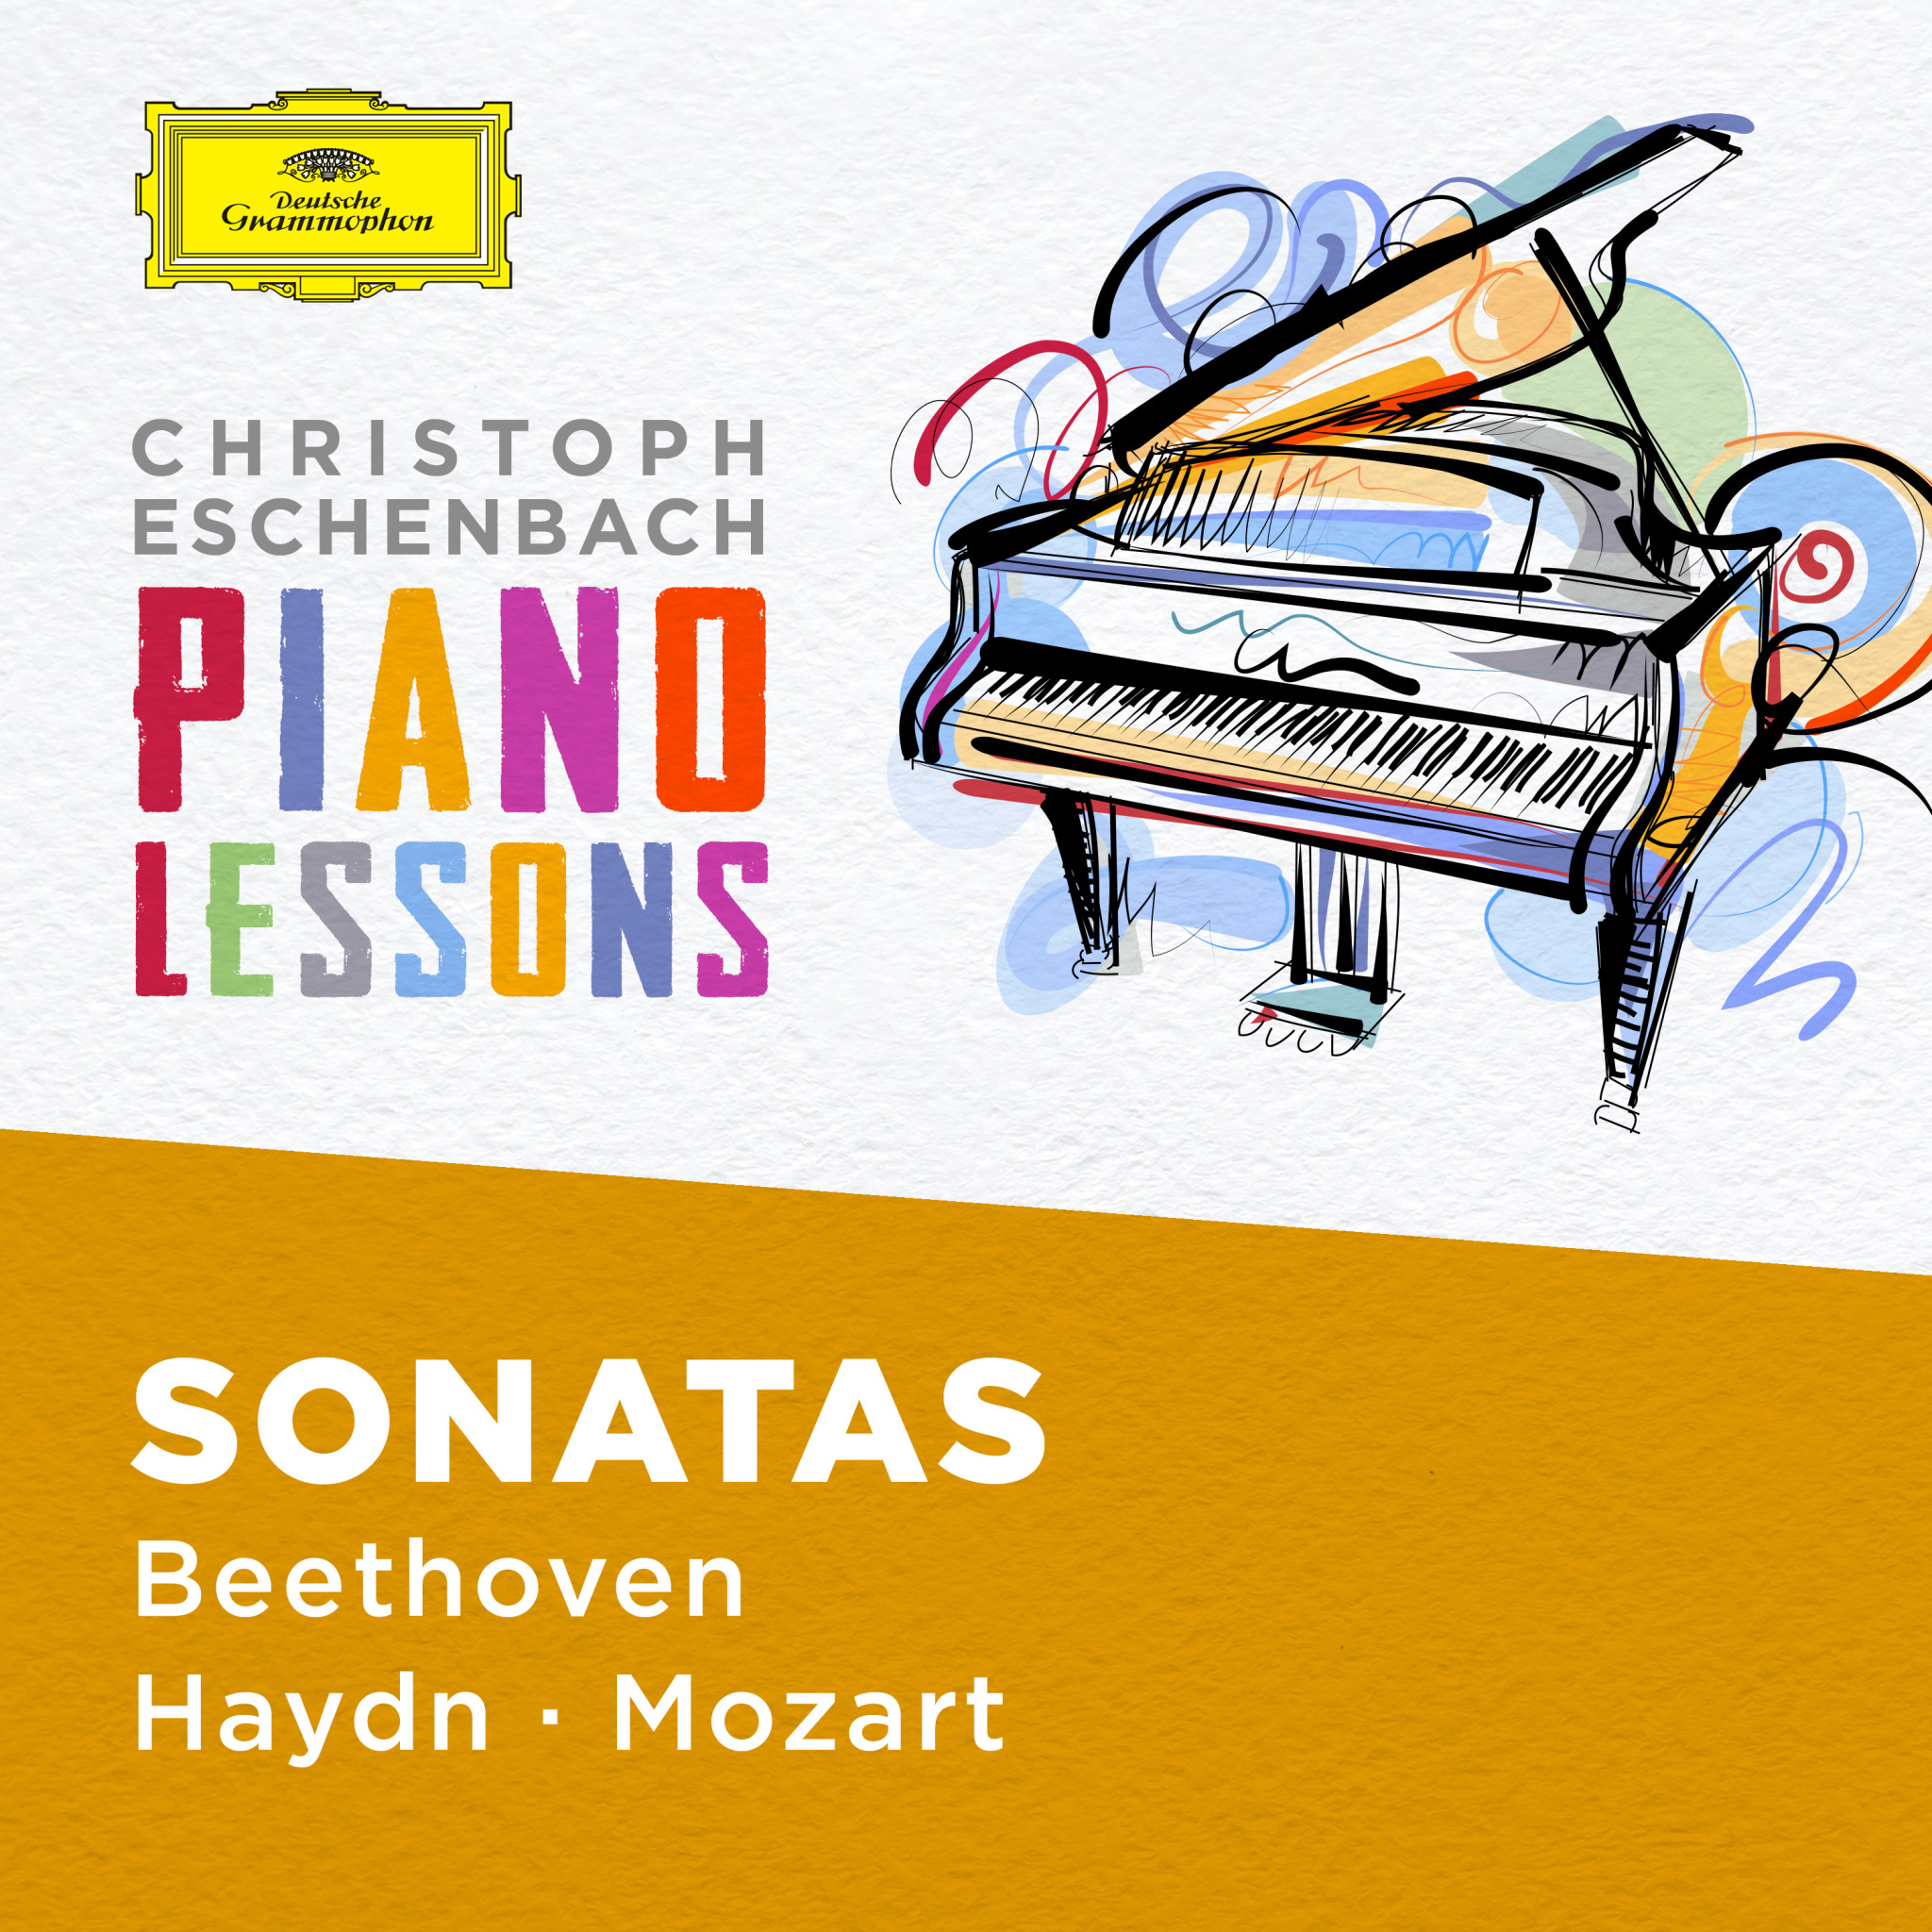 Christoph Eschenbach - Piano Lessons - Piano Sonatas by Haydn, Mozart, Beethoven Cover